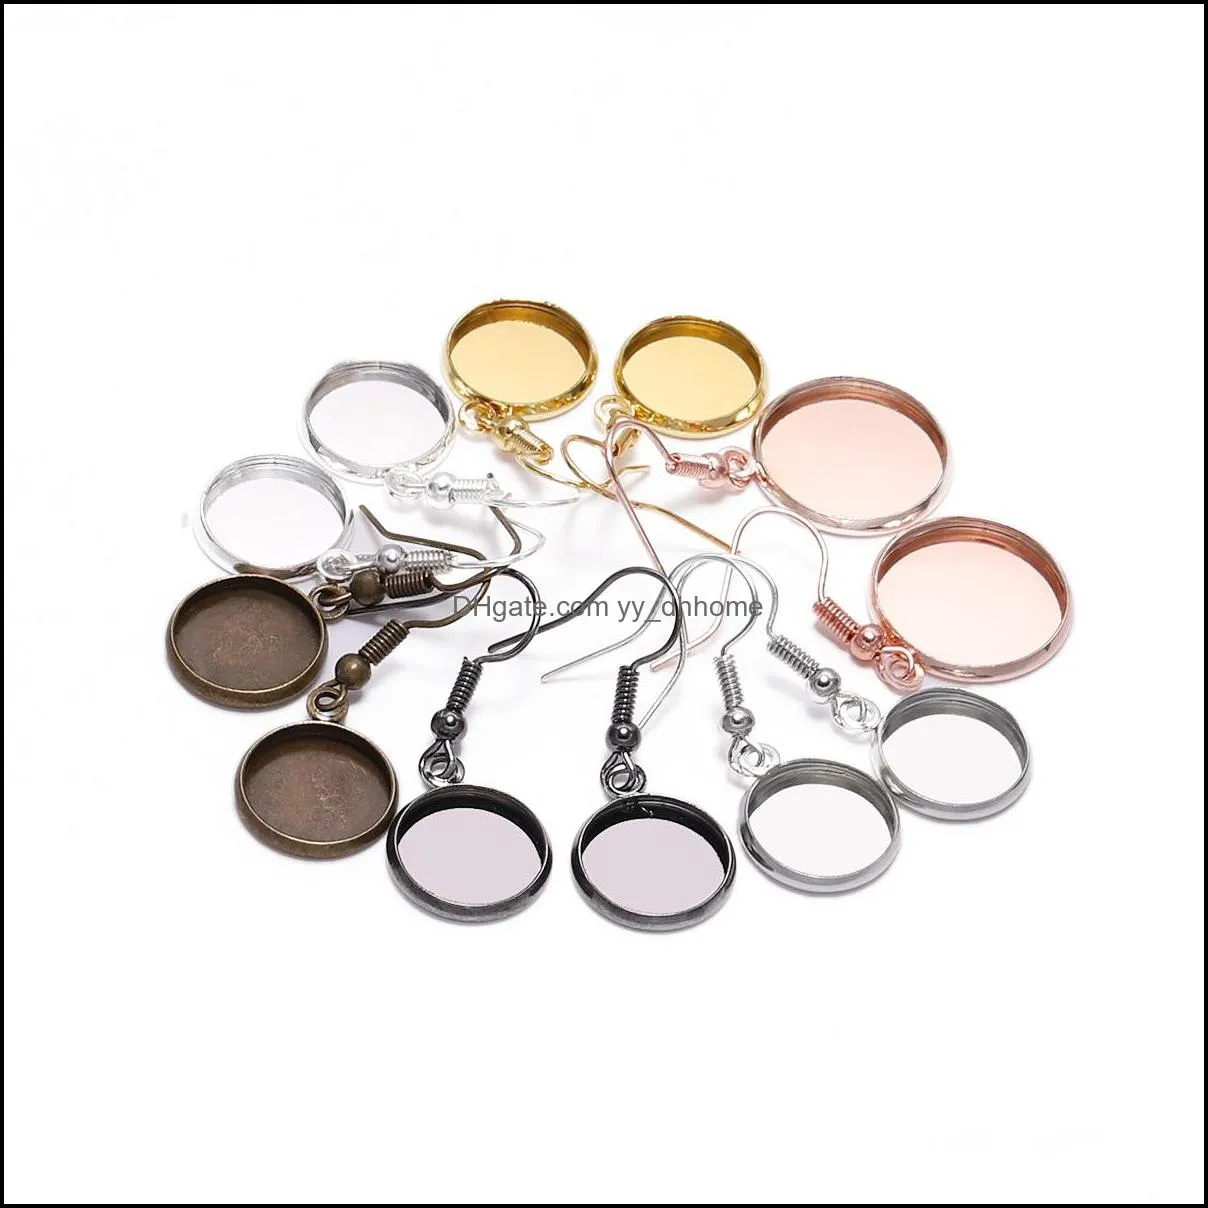 10-25mm Tray Bezel Cabochon Earring Hook Blank Setting Round Pendant Ear Base Findings For Diy Glass Cameo Jewelry Making